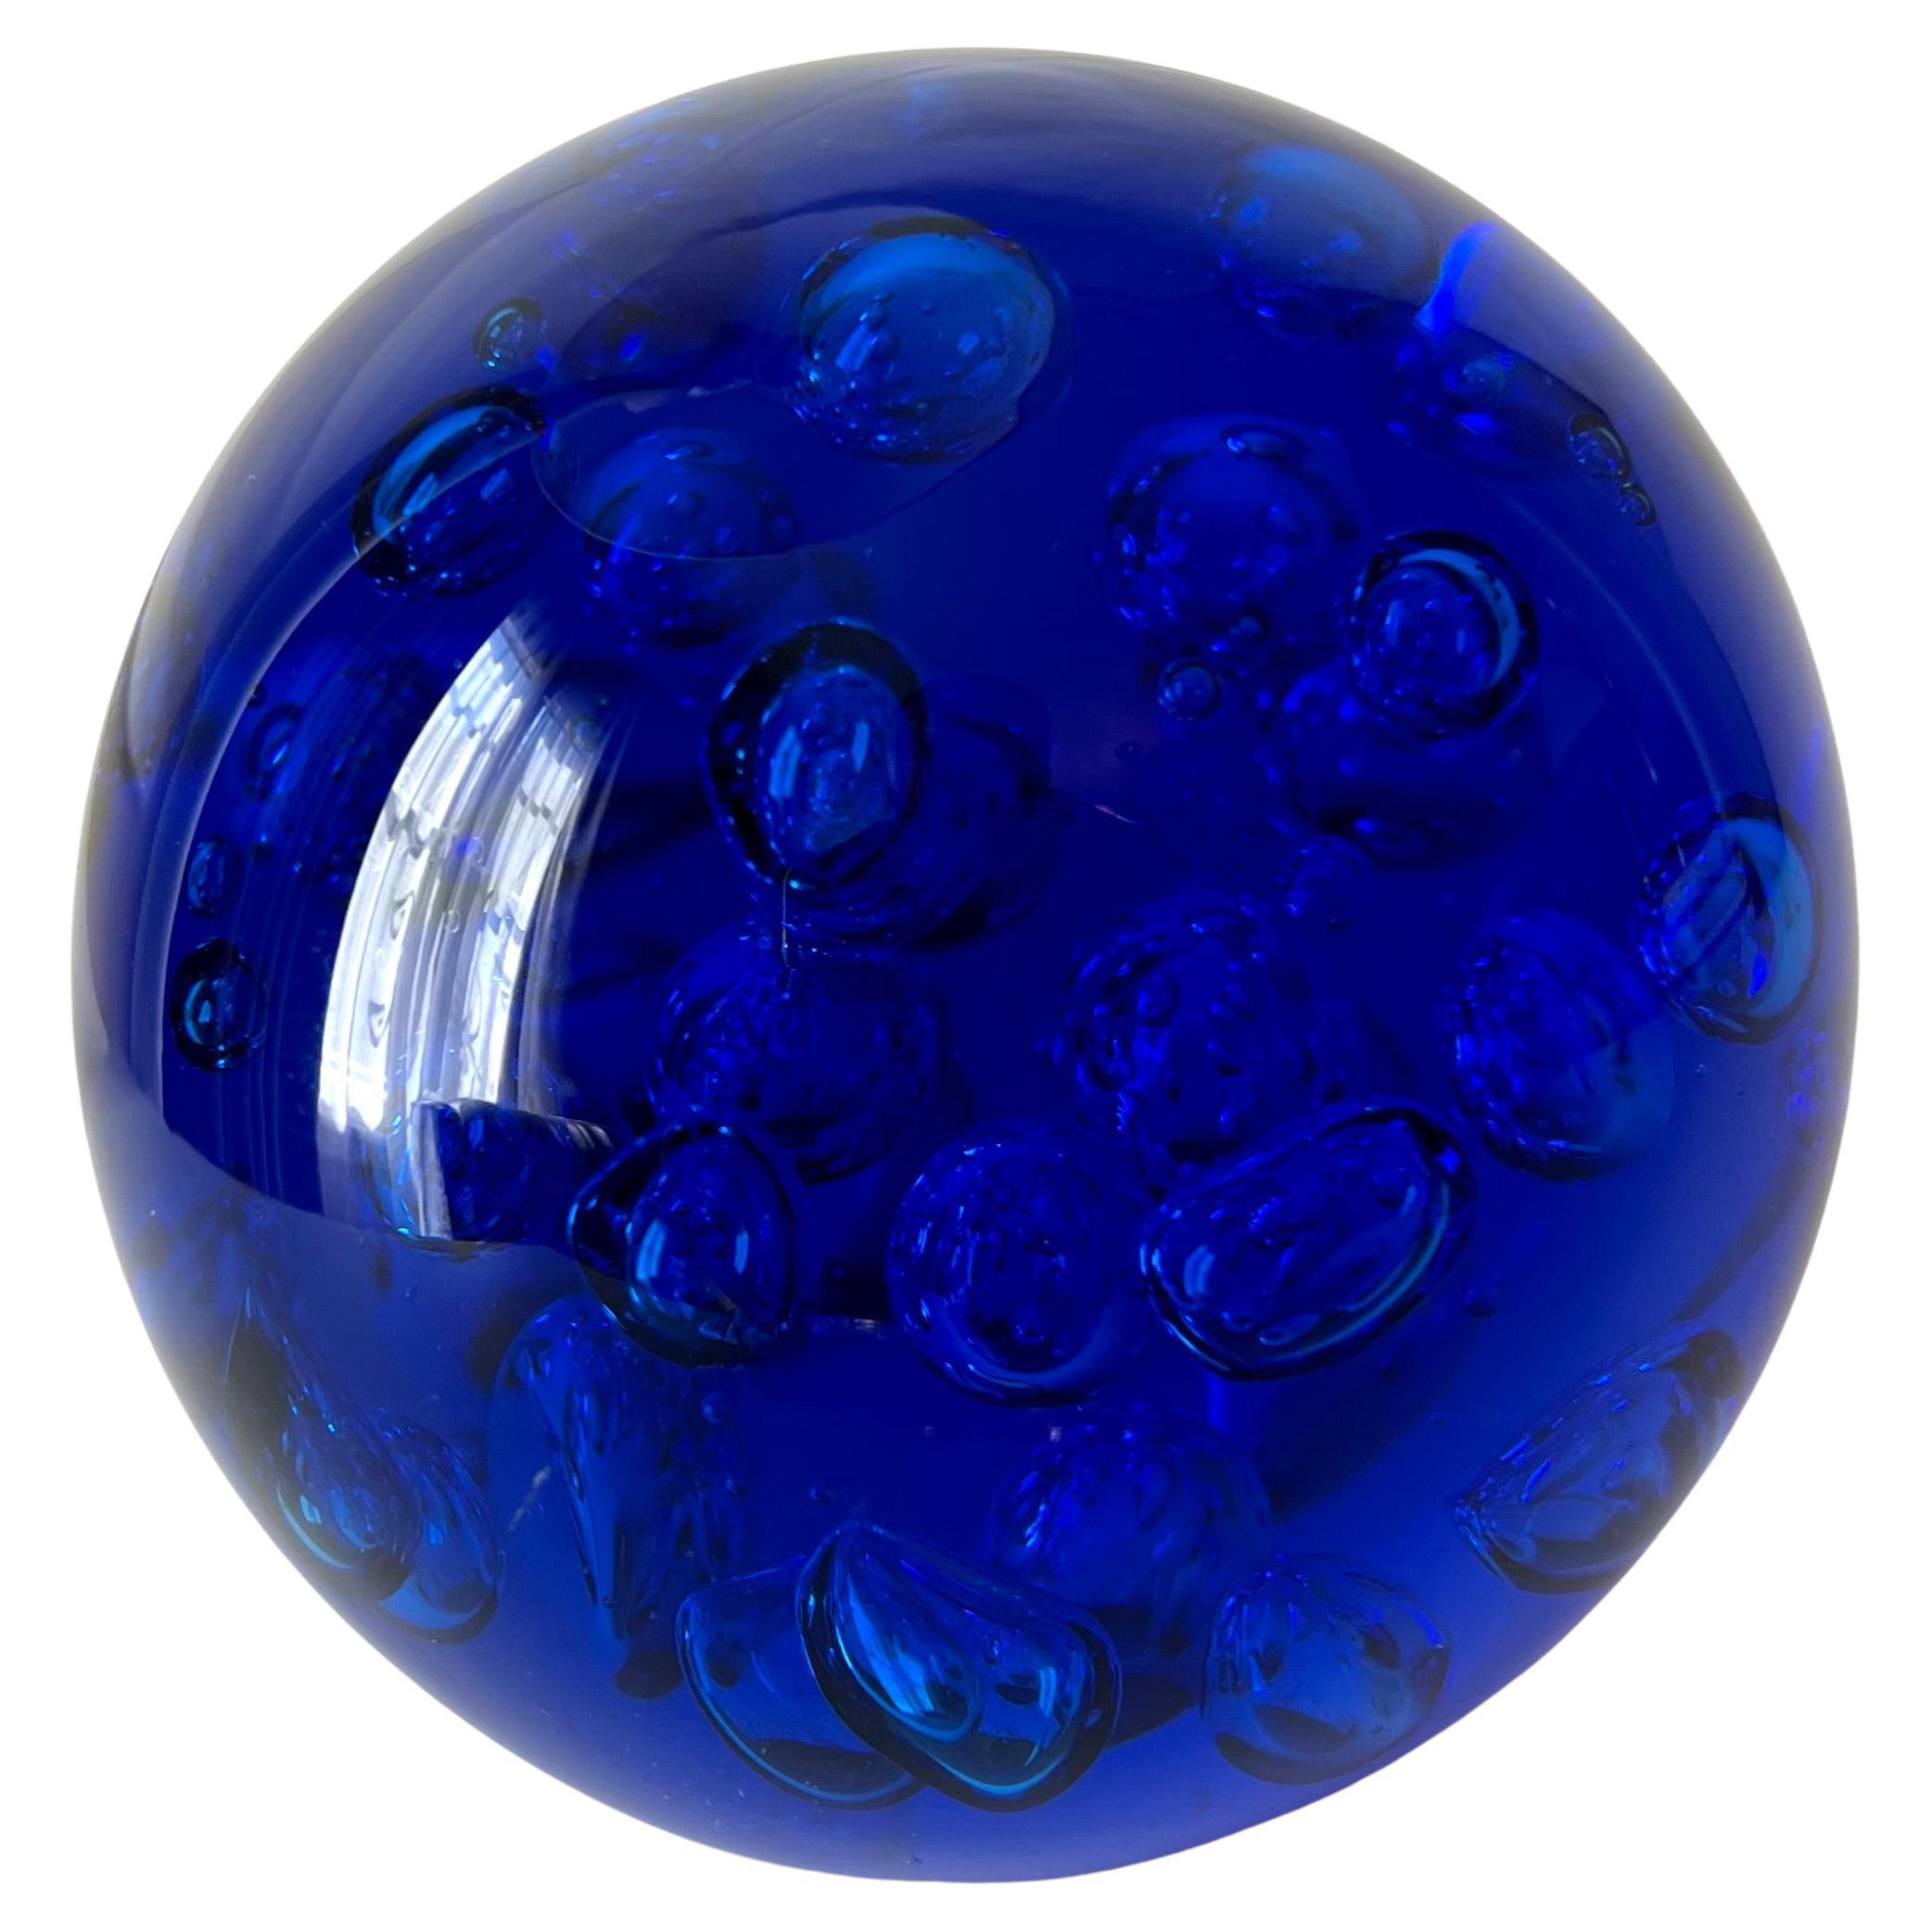 Brilliant Cobalt Blue Glass Paper Weight with Bubbles For Sale